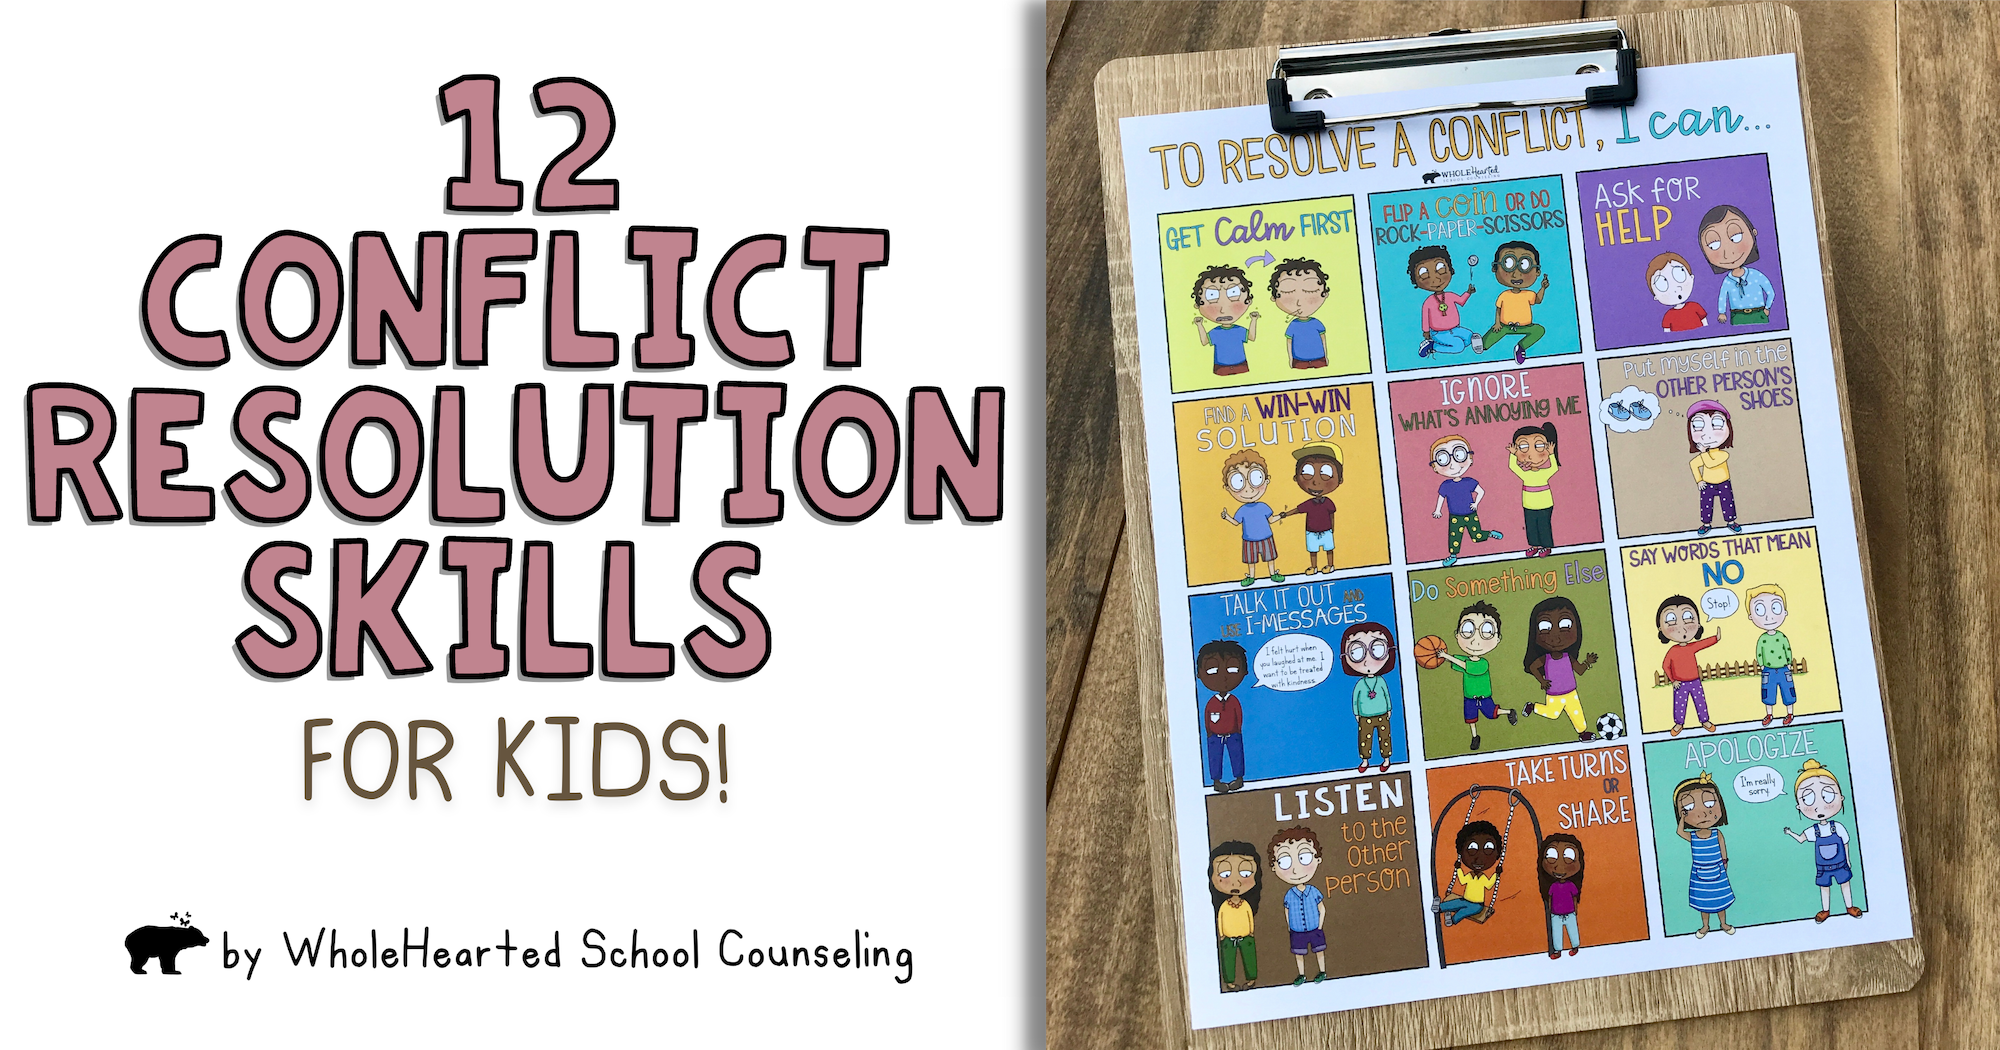 12 Conflict Resolution Skills for Kids poster on clipboard.